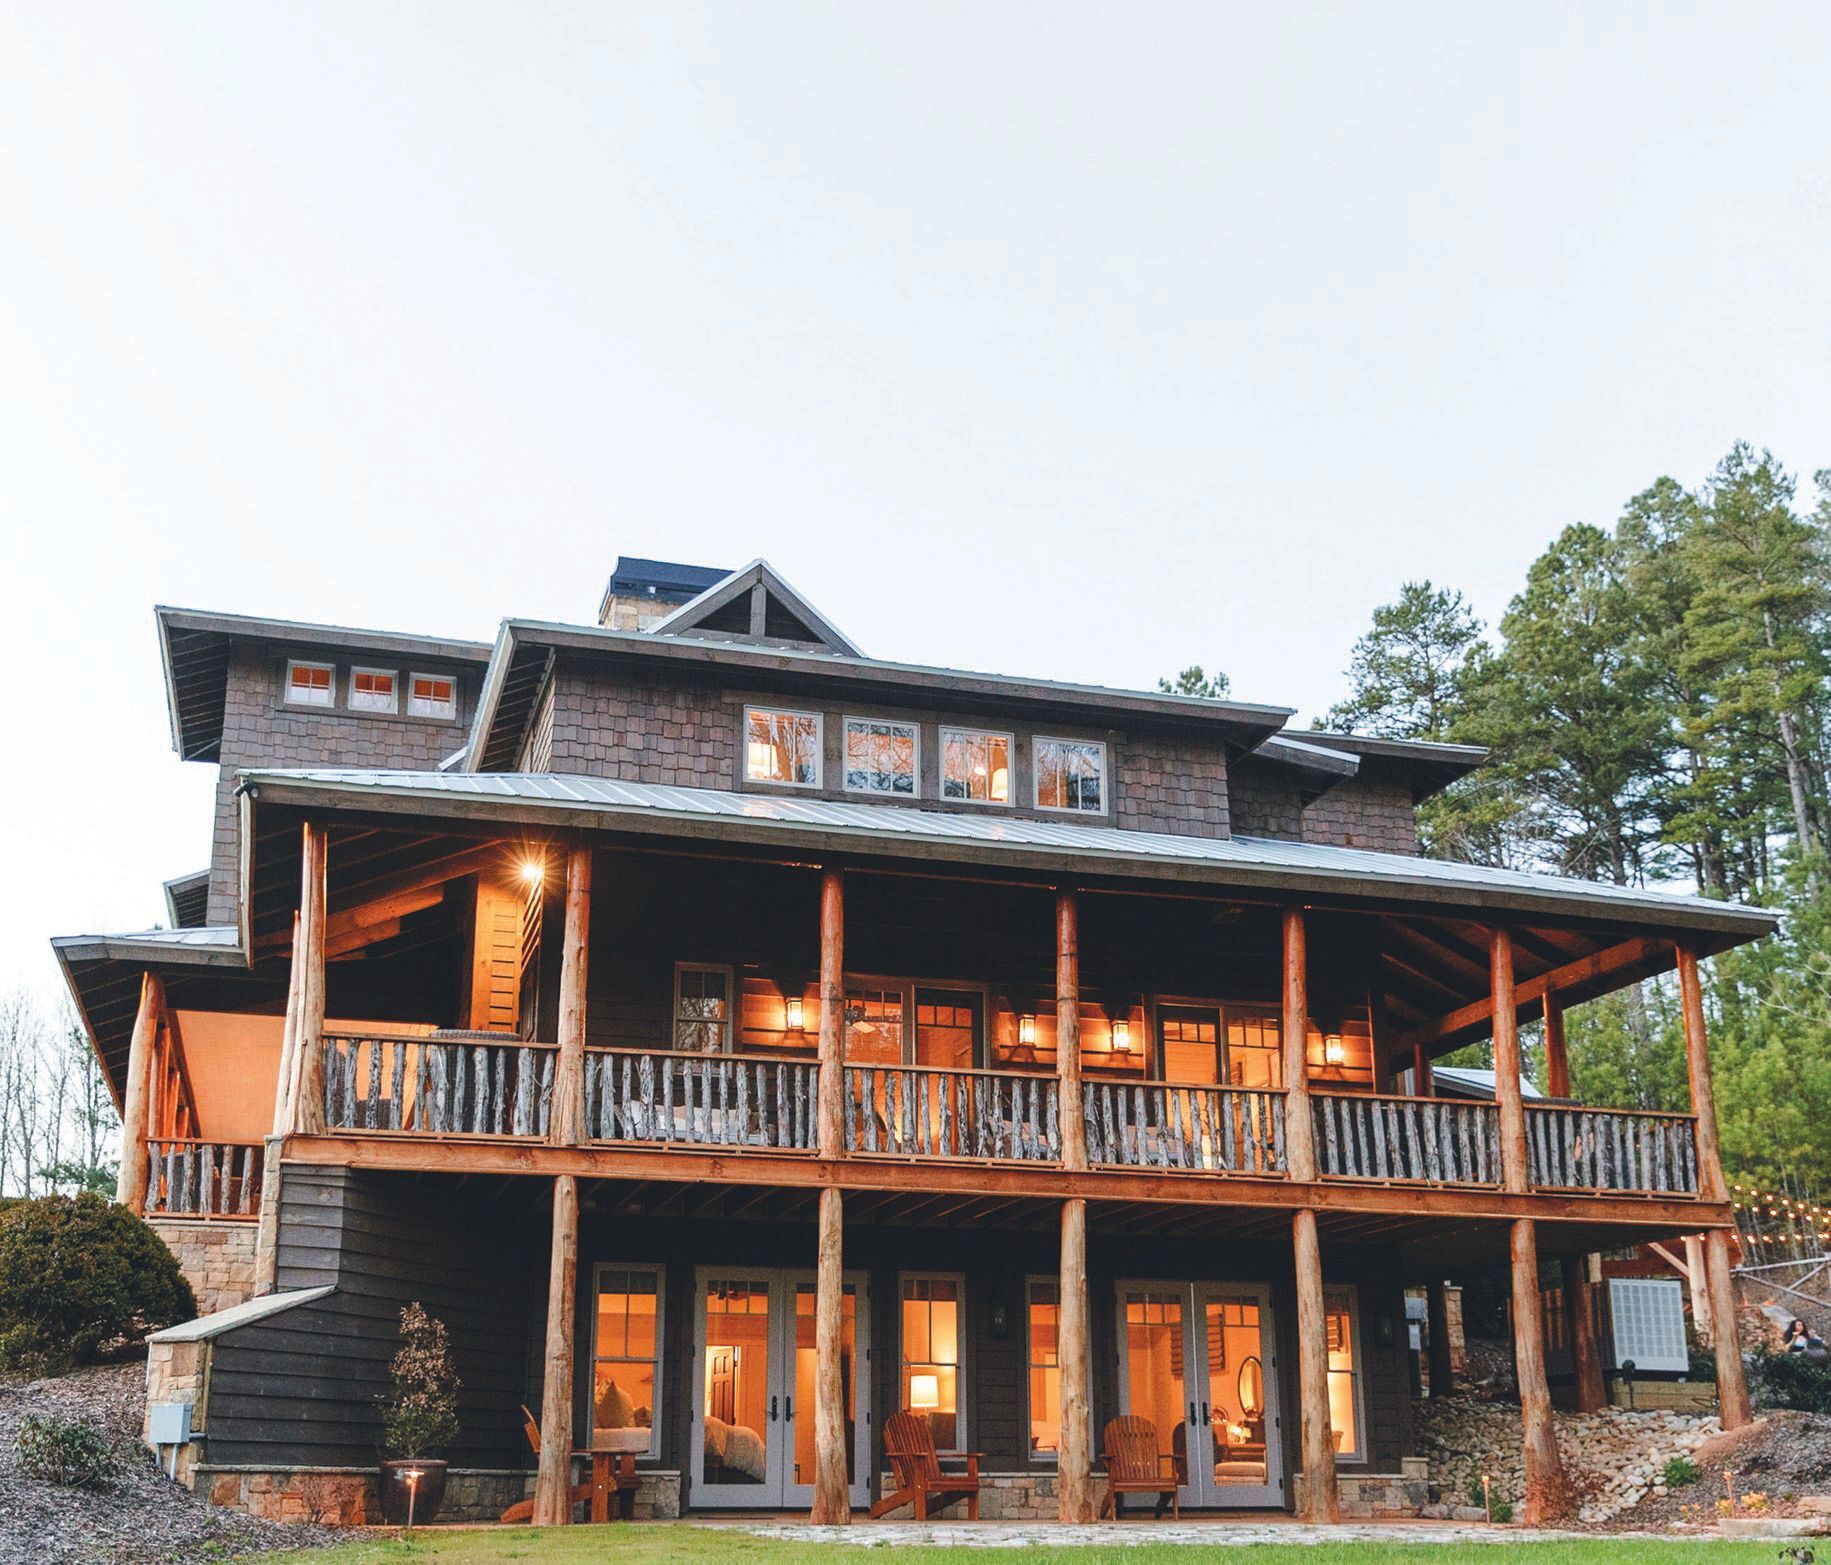 The Lodge at Walnut Grove’s exterior elevation is elevated and rustic. PHOTO BY OUTLIVE CREATIVE